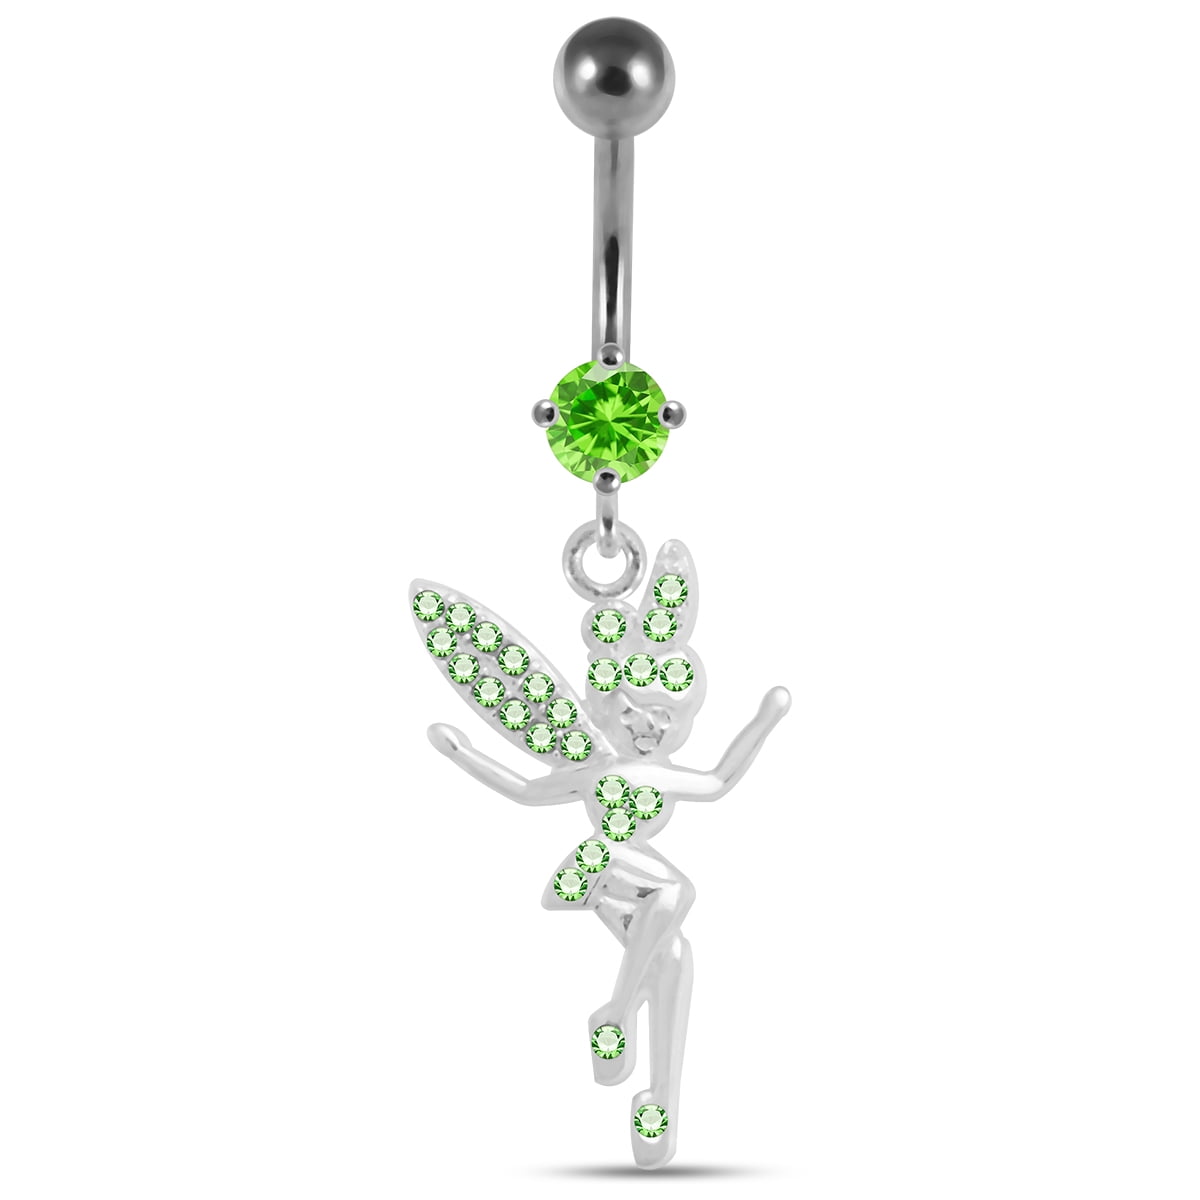 Silver Belly Rings CZ Gemstone Stylish Round with 2 Flower Dangling 925 Sterling Body Jewelry